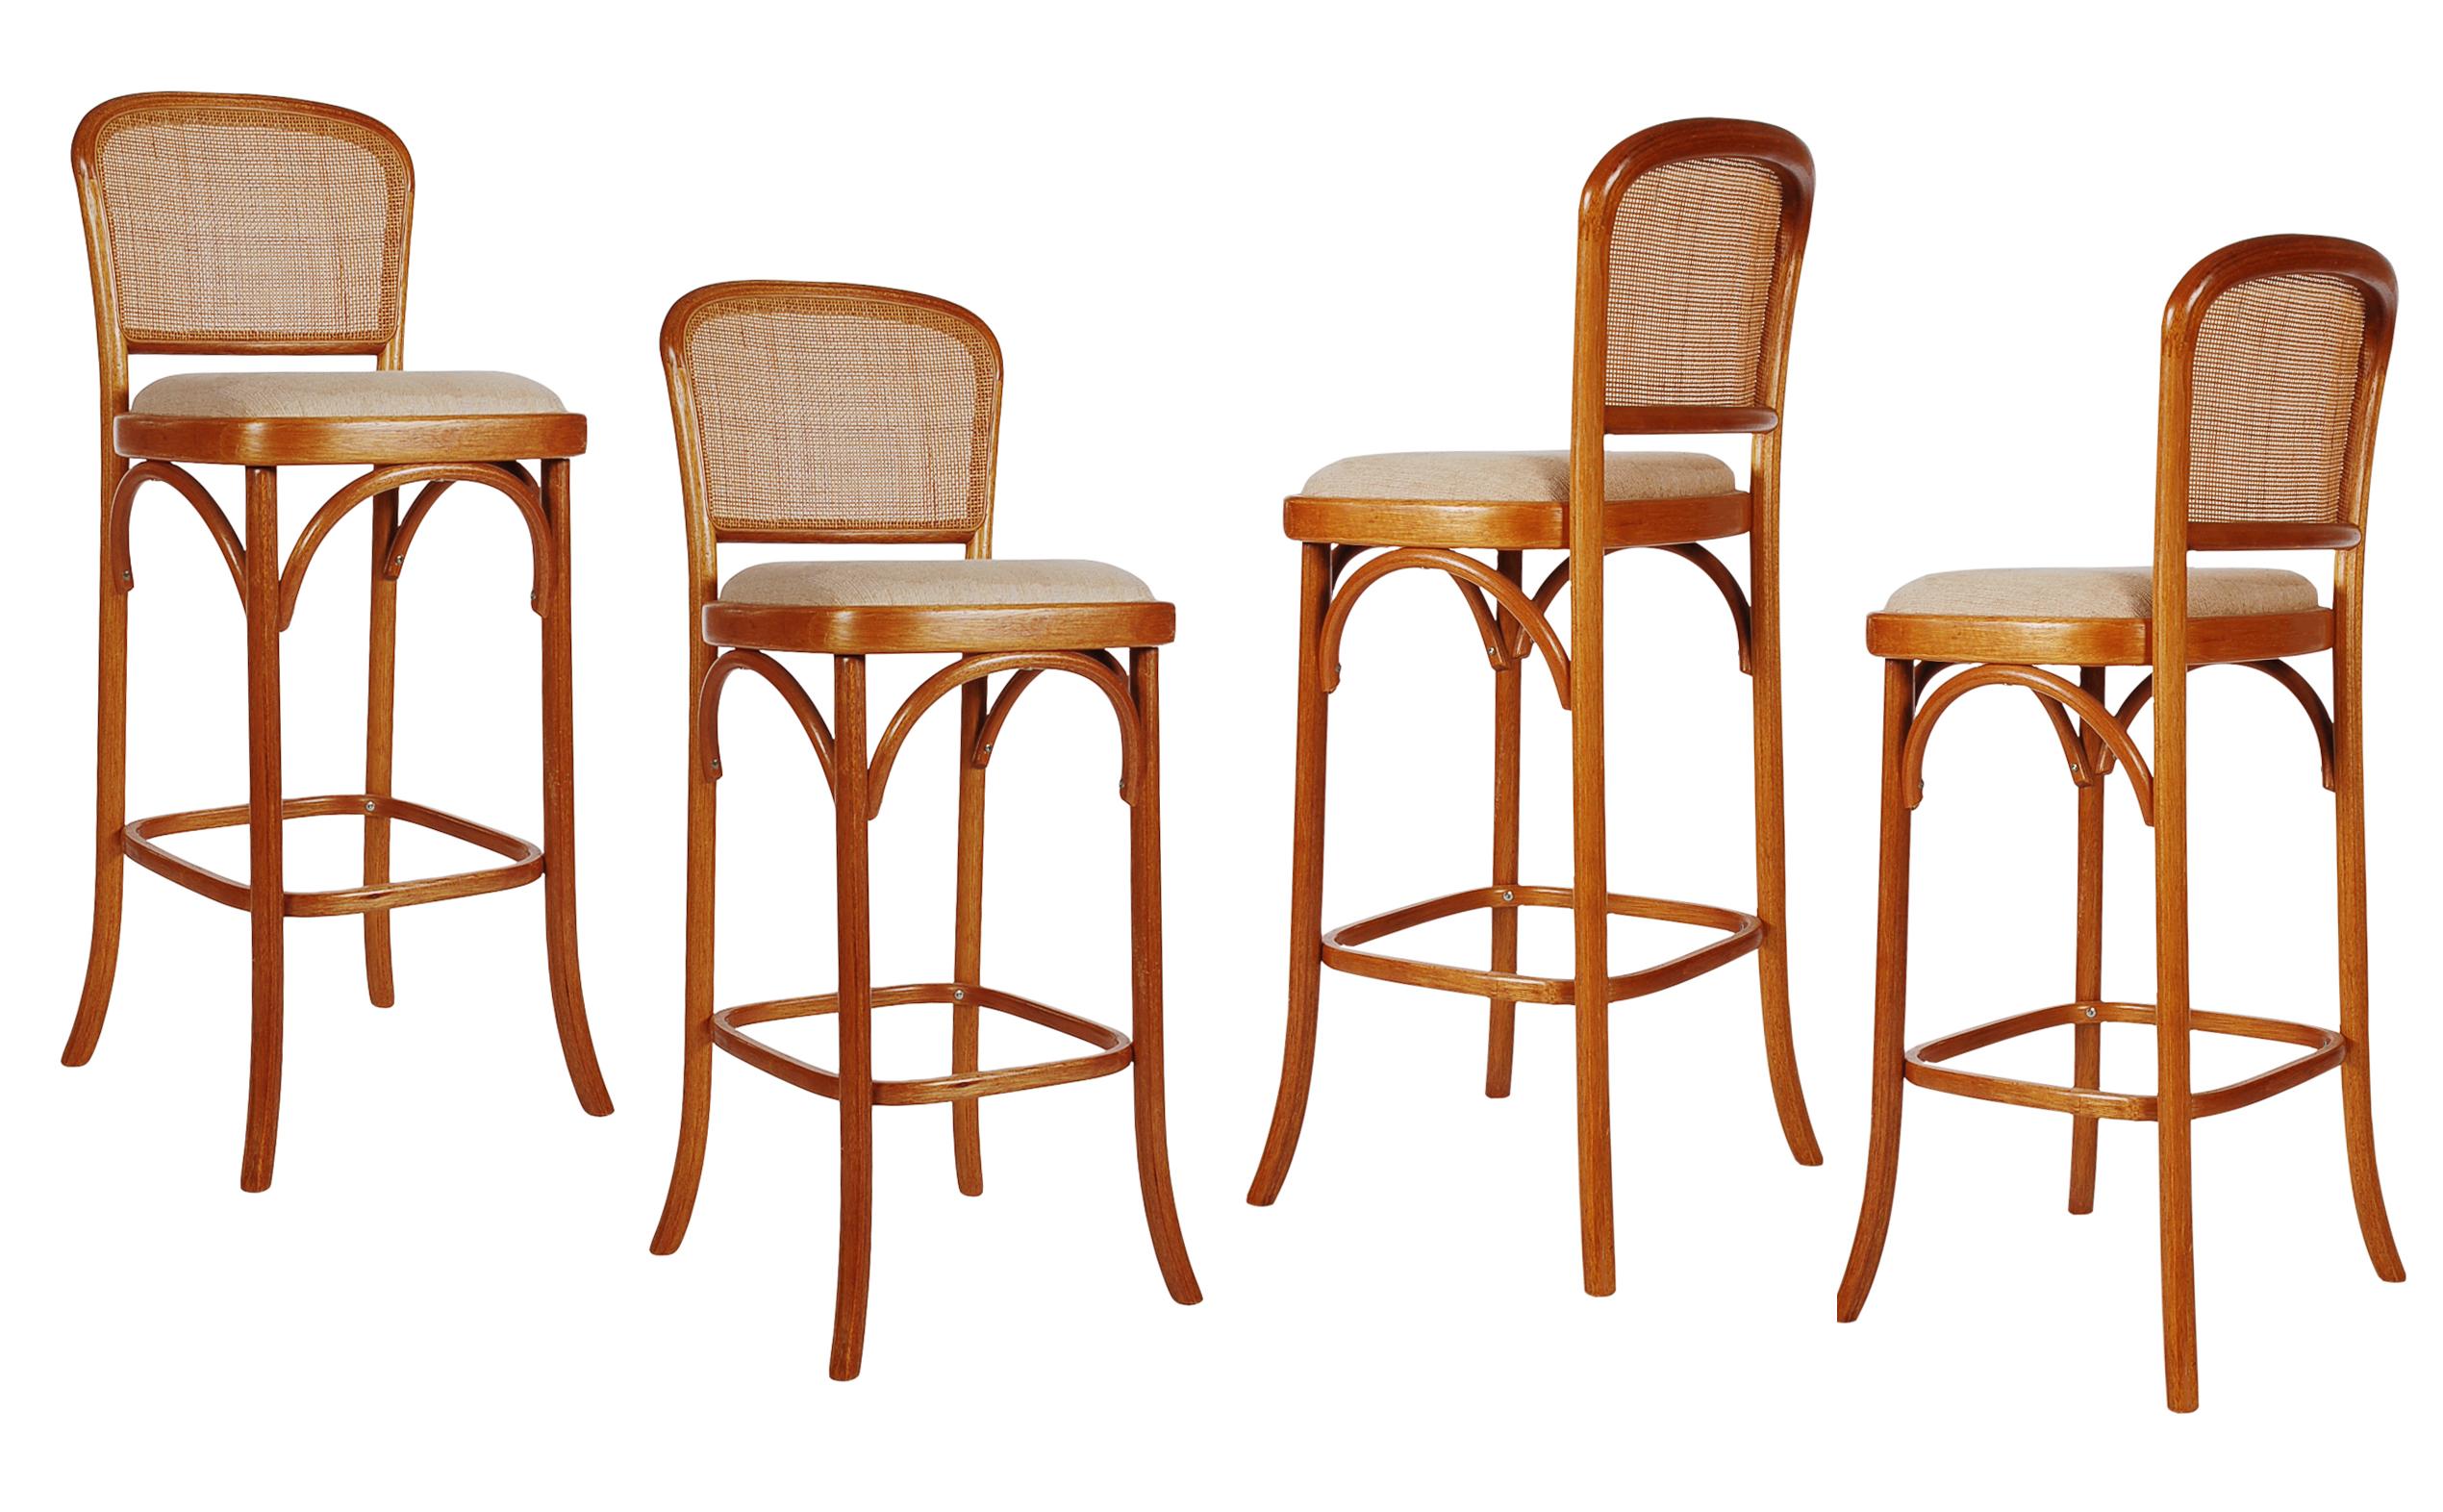 Fabric Set of 4 Mid-Century Modern Cane Back Bar Stools after Le Corbusier for Thonet